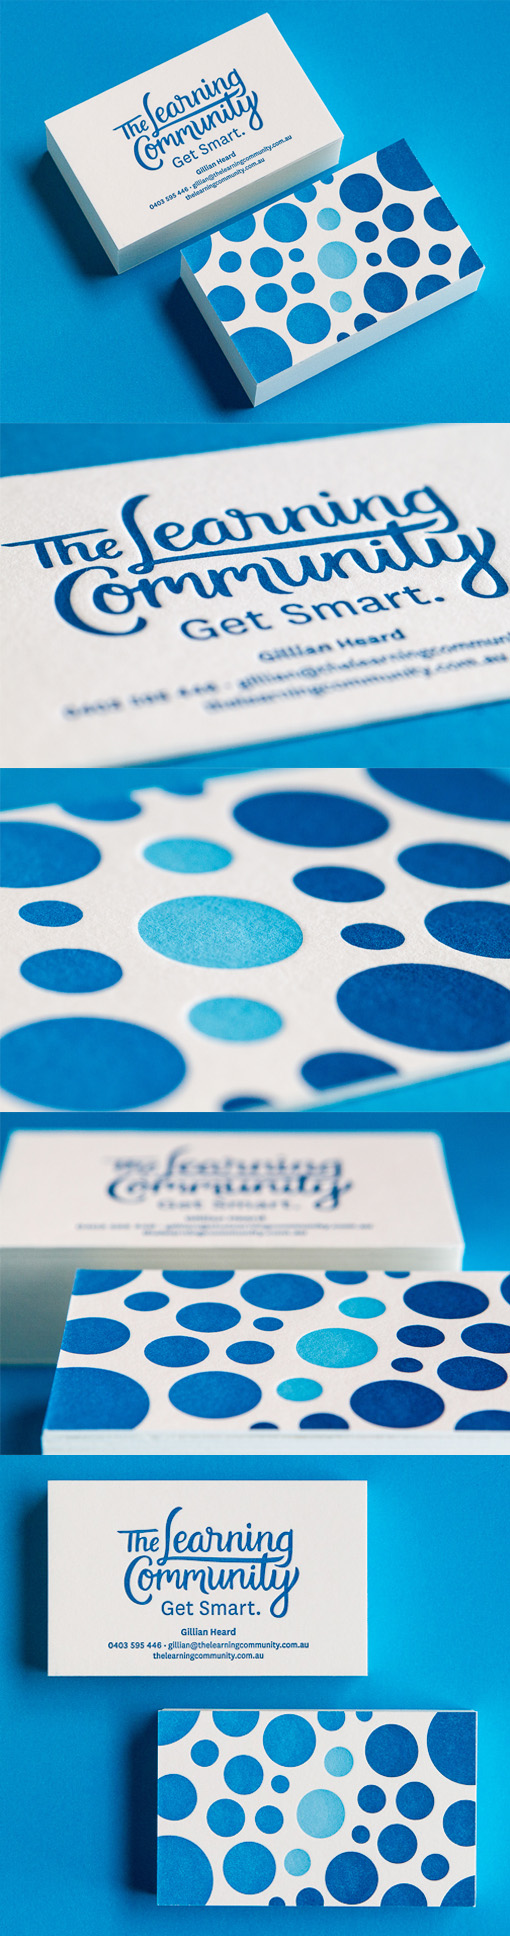 Bright And Upbeat Pattern And Typography On A Business Card For An Education Provider